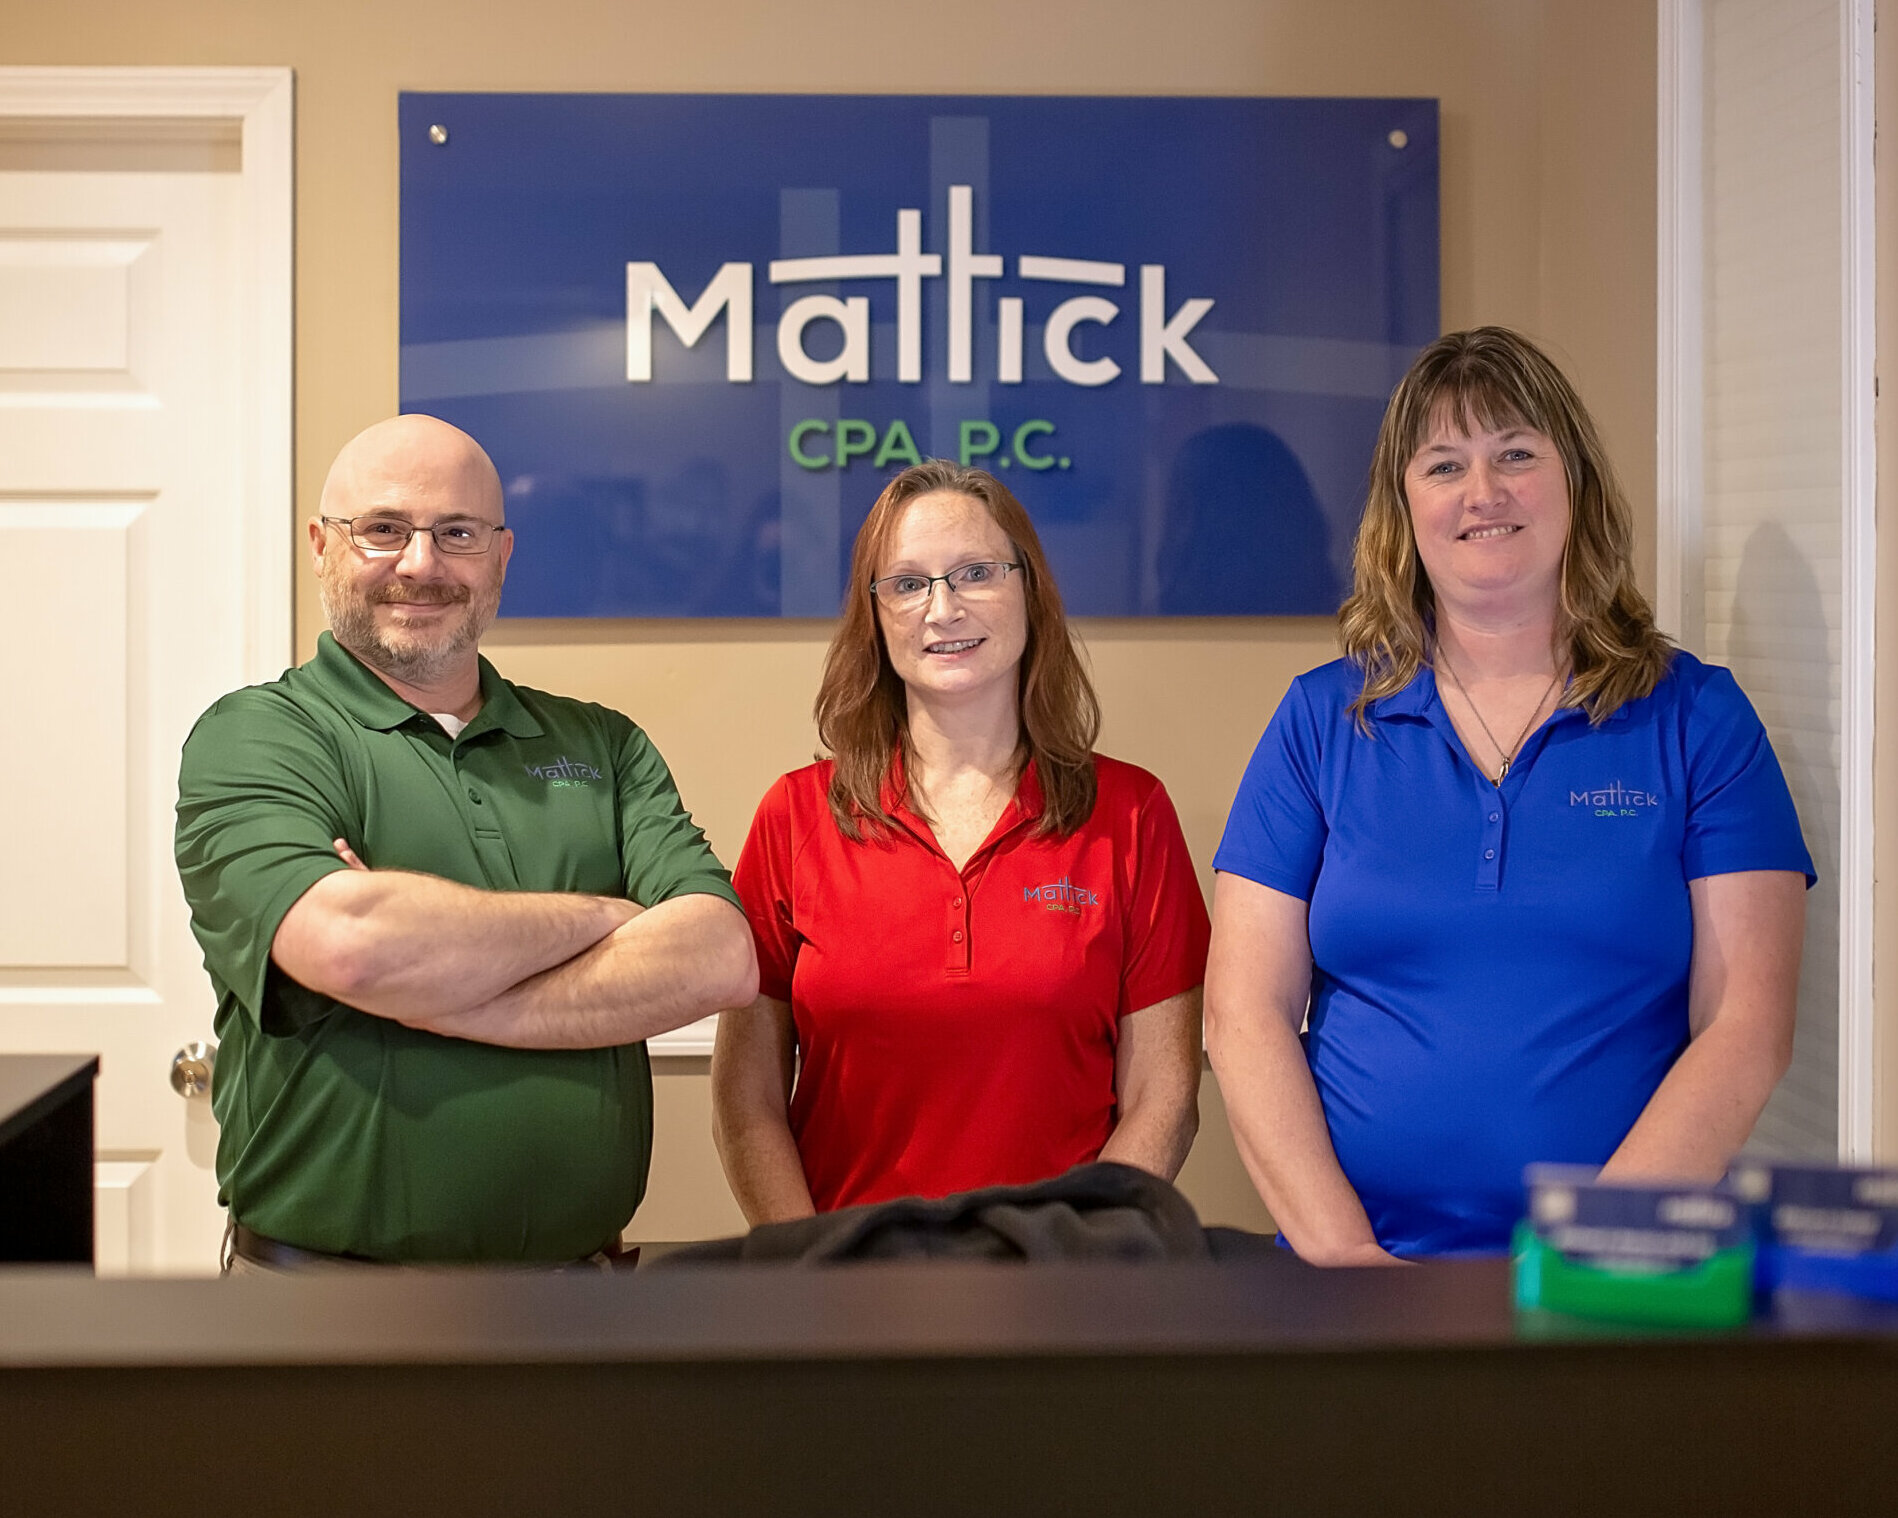 The Mattick team standing together in the office